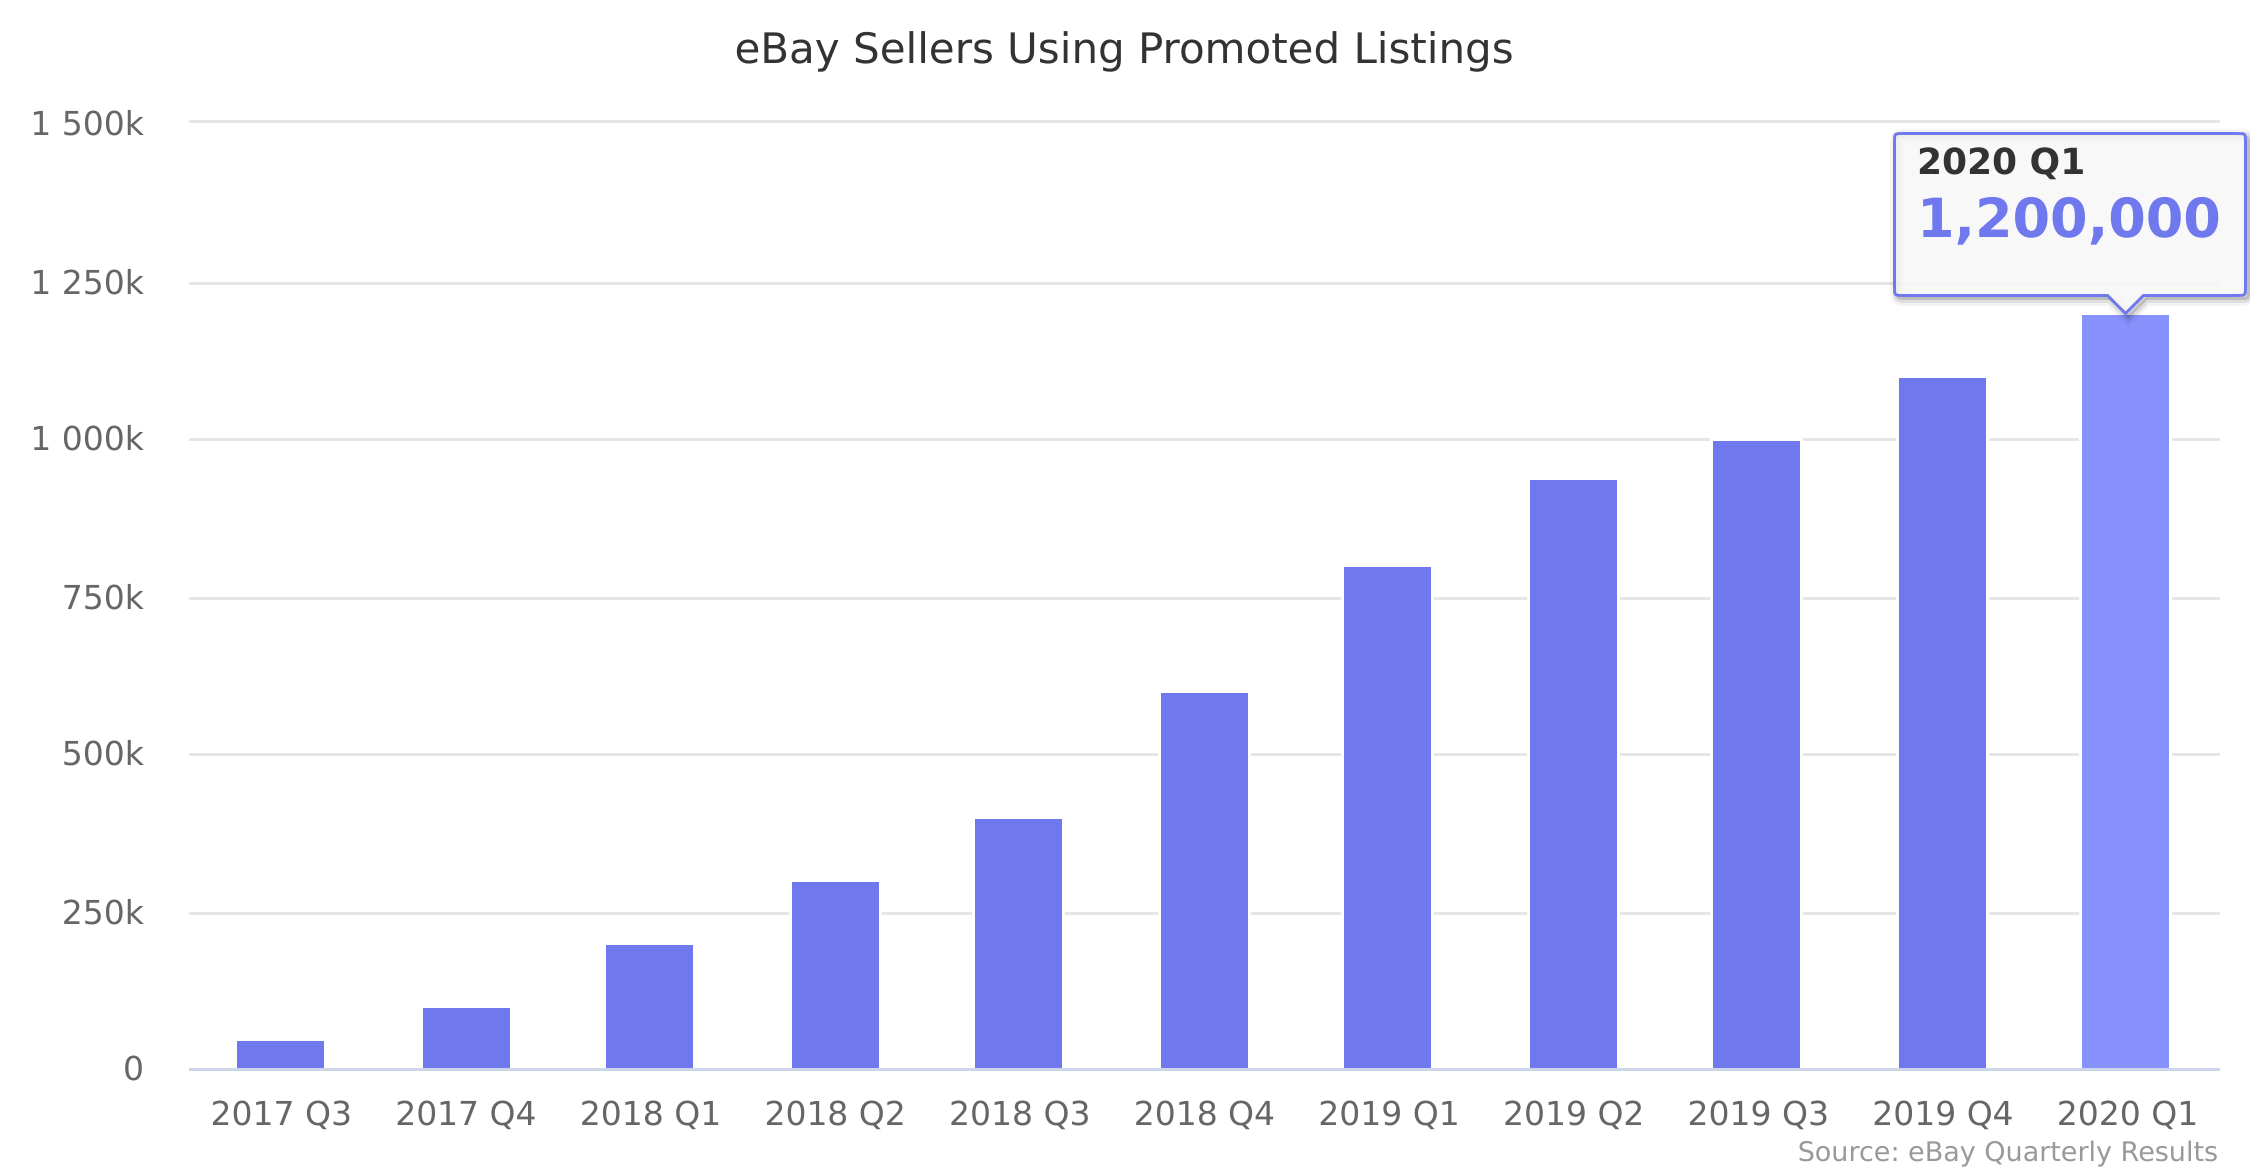 eBay Sellers Using Promoted Listings 2017-2020